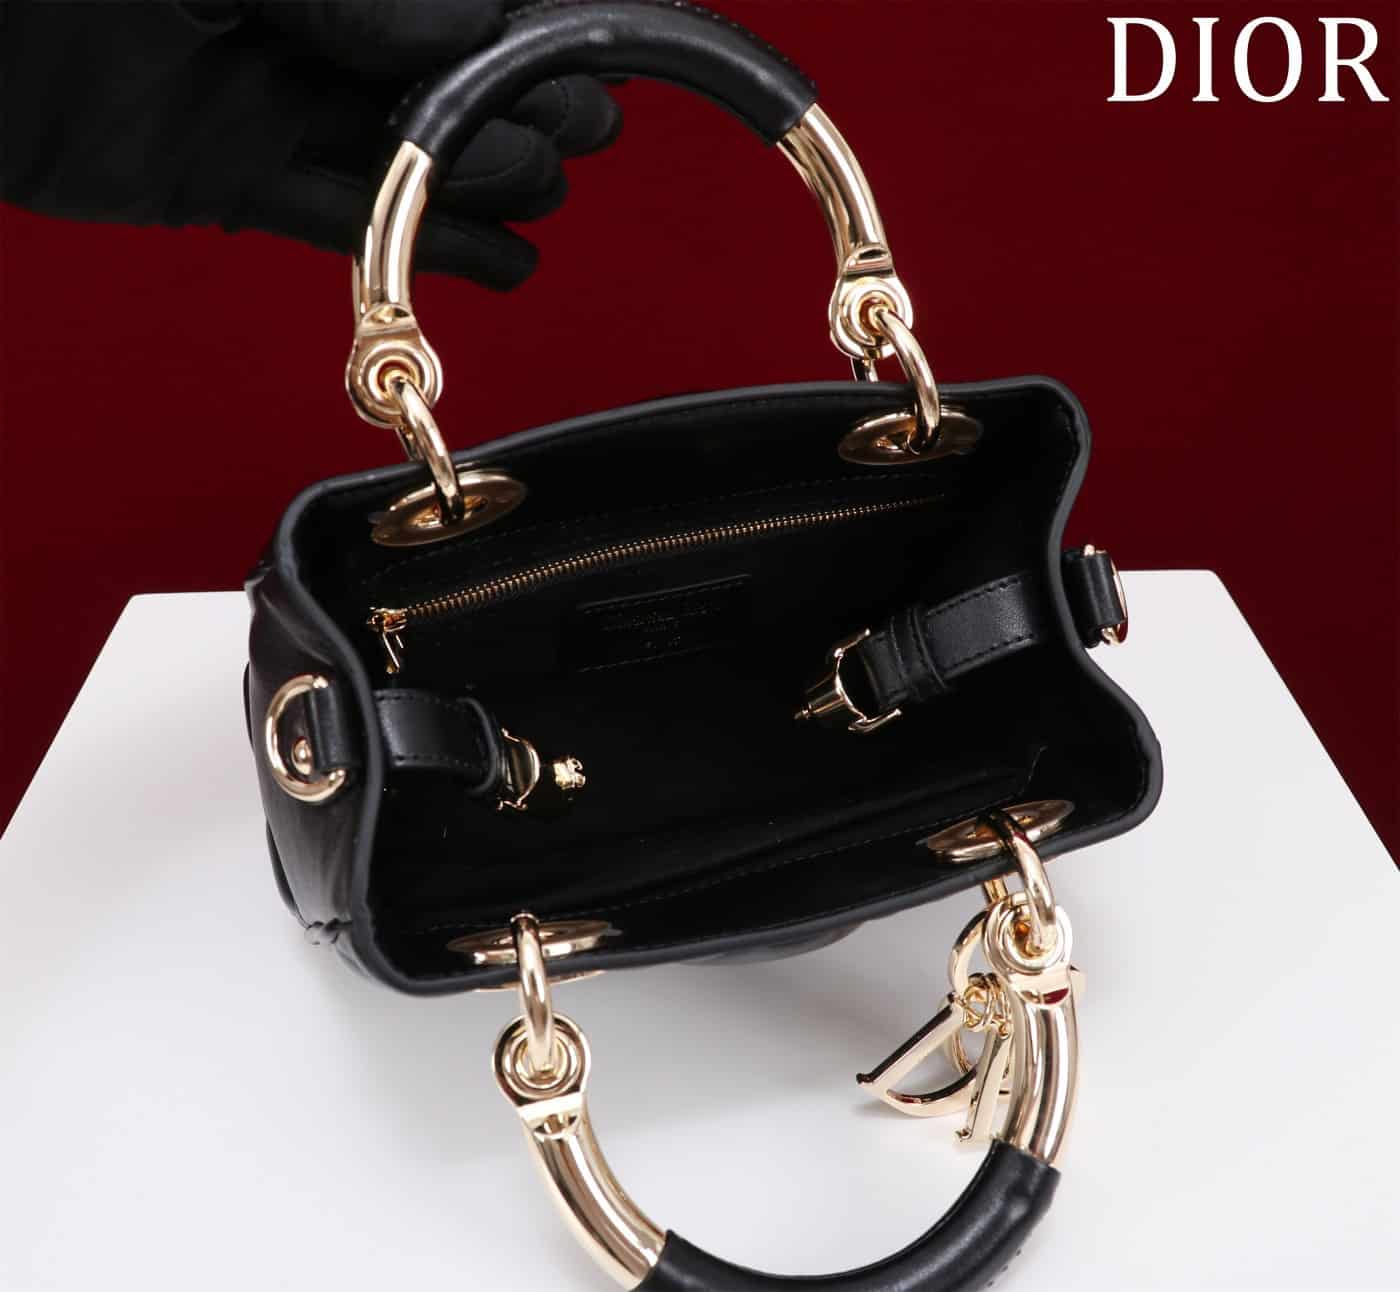 Lady Dior Bag Review What Fits Inside History Price Mod Shots  Comparison to Chanel Classic Flap  YouTube